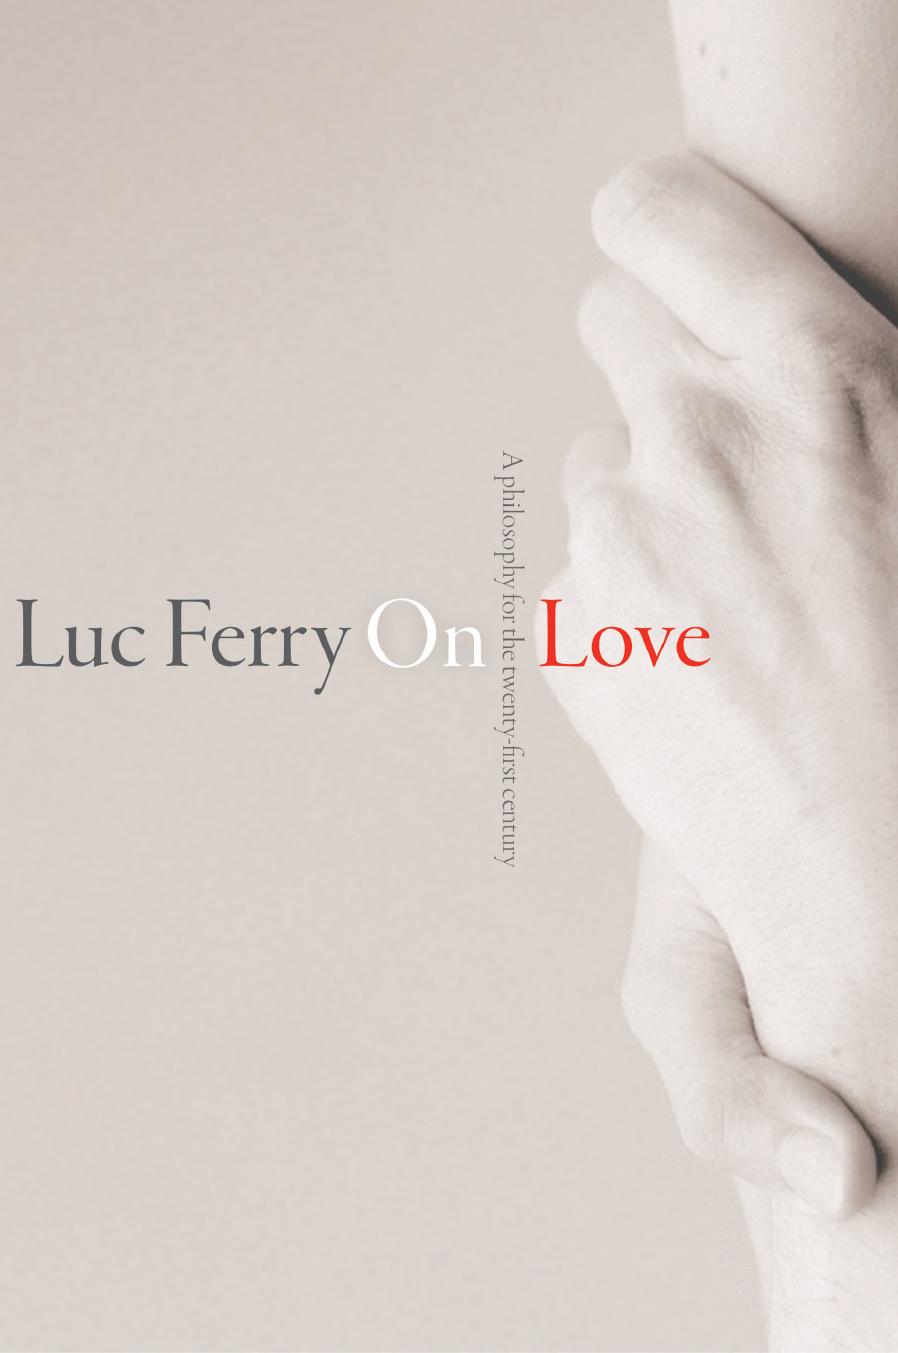 On Love by Luc Ferry